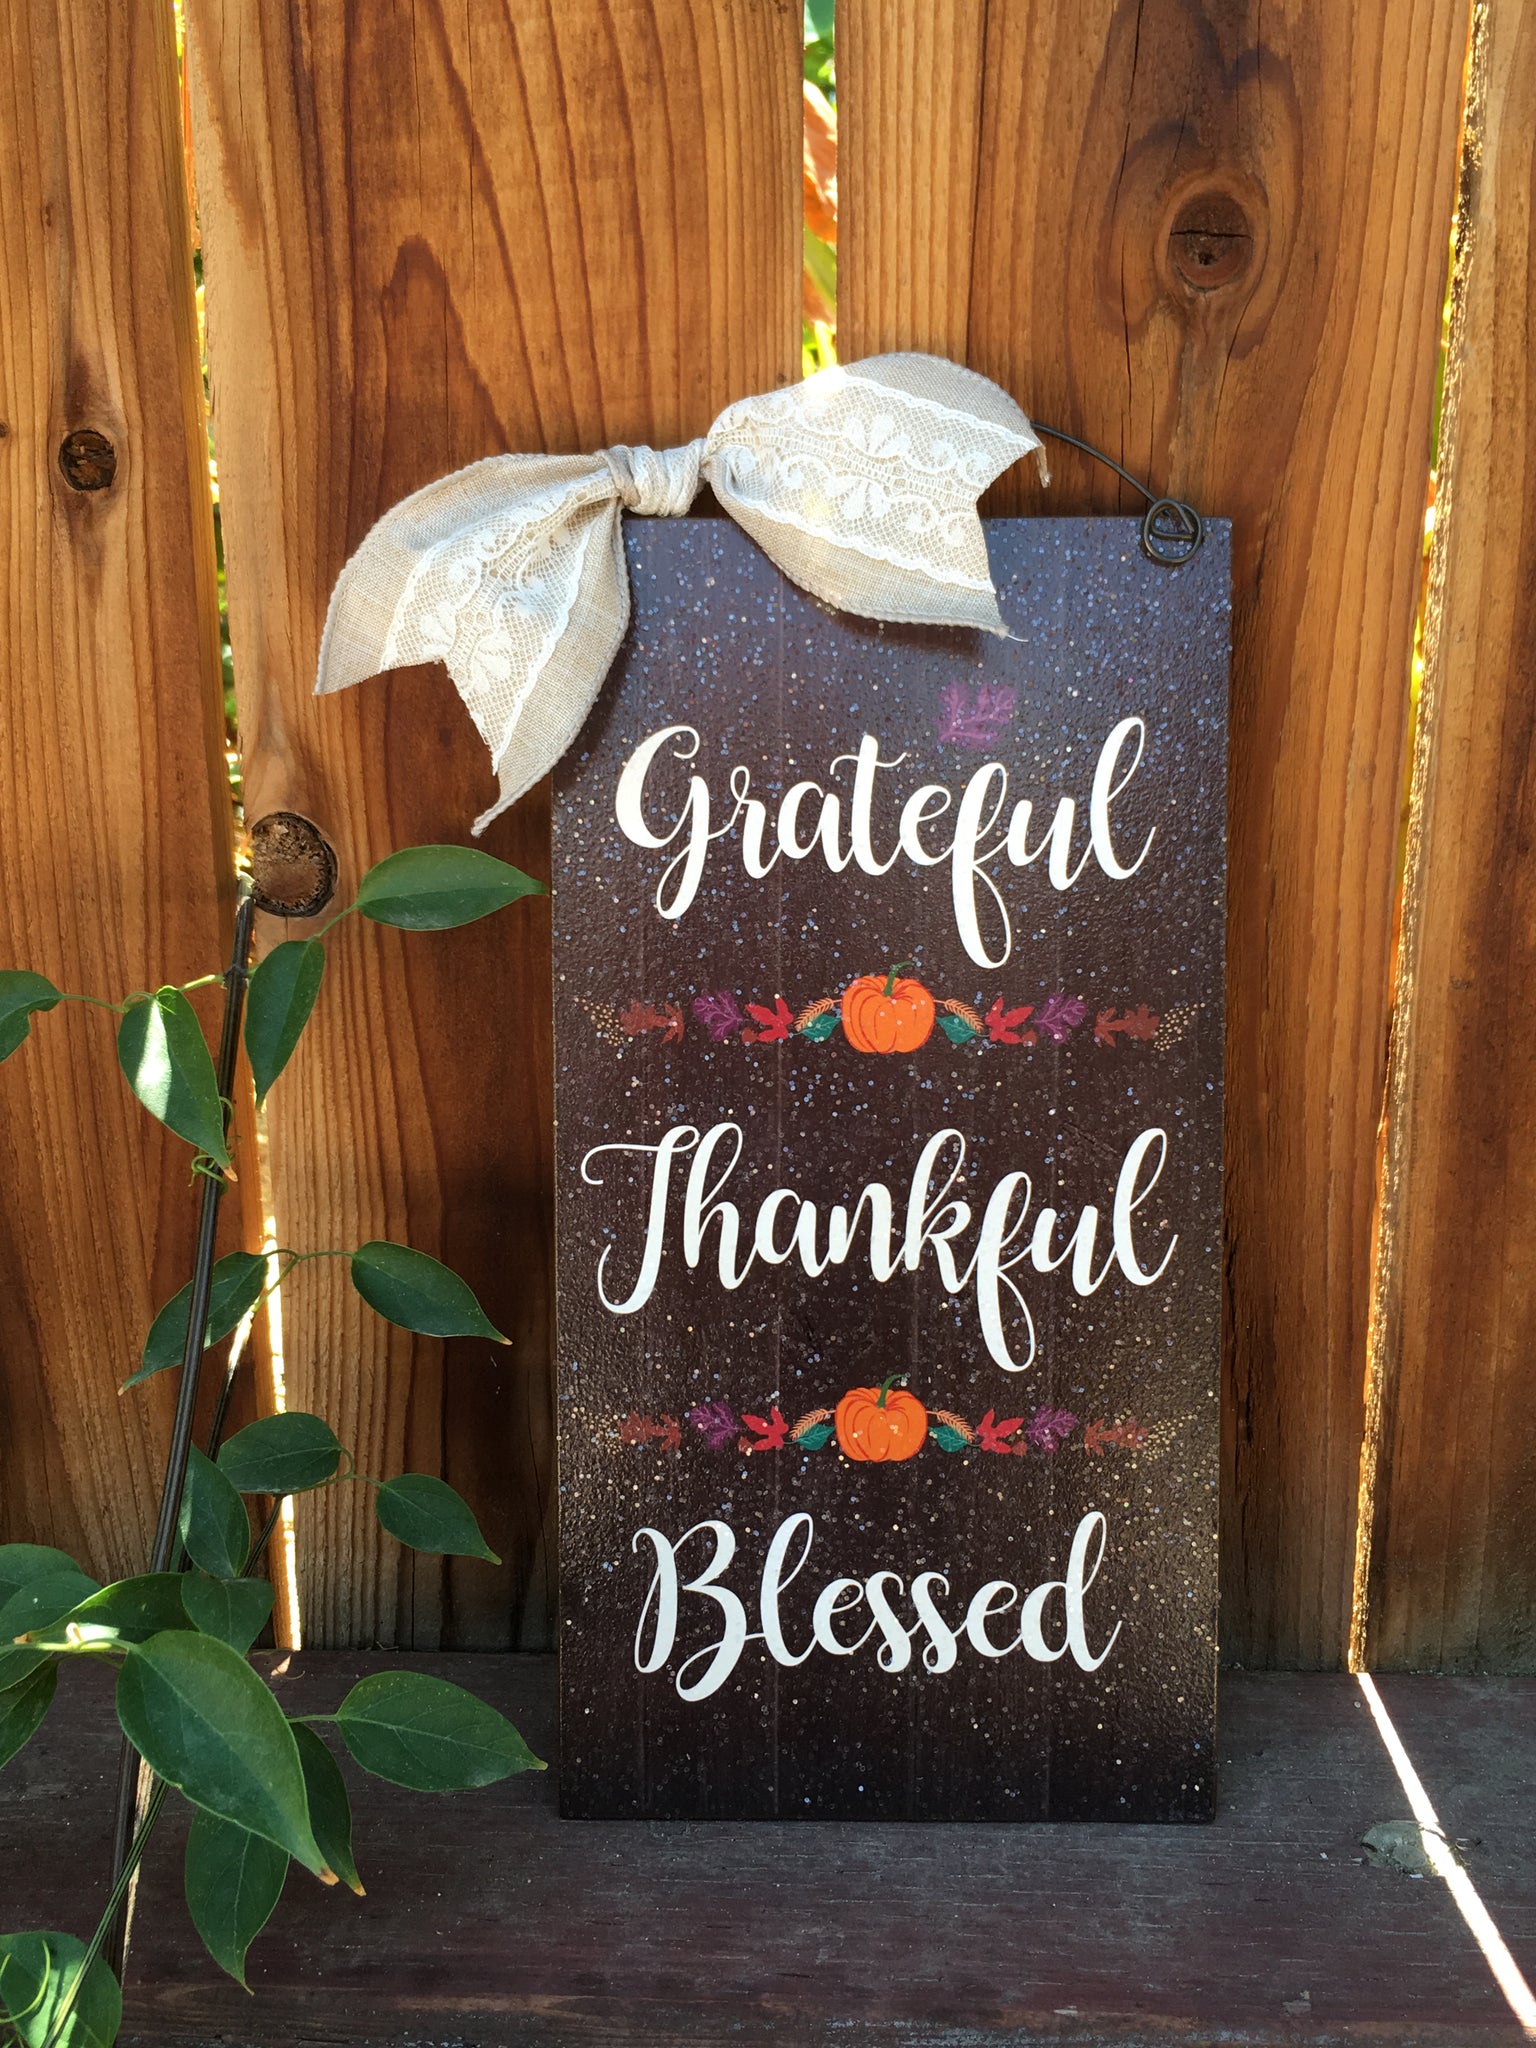 Grateful Thankful Blessed sign.